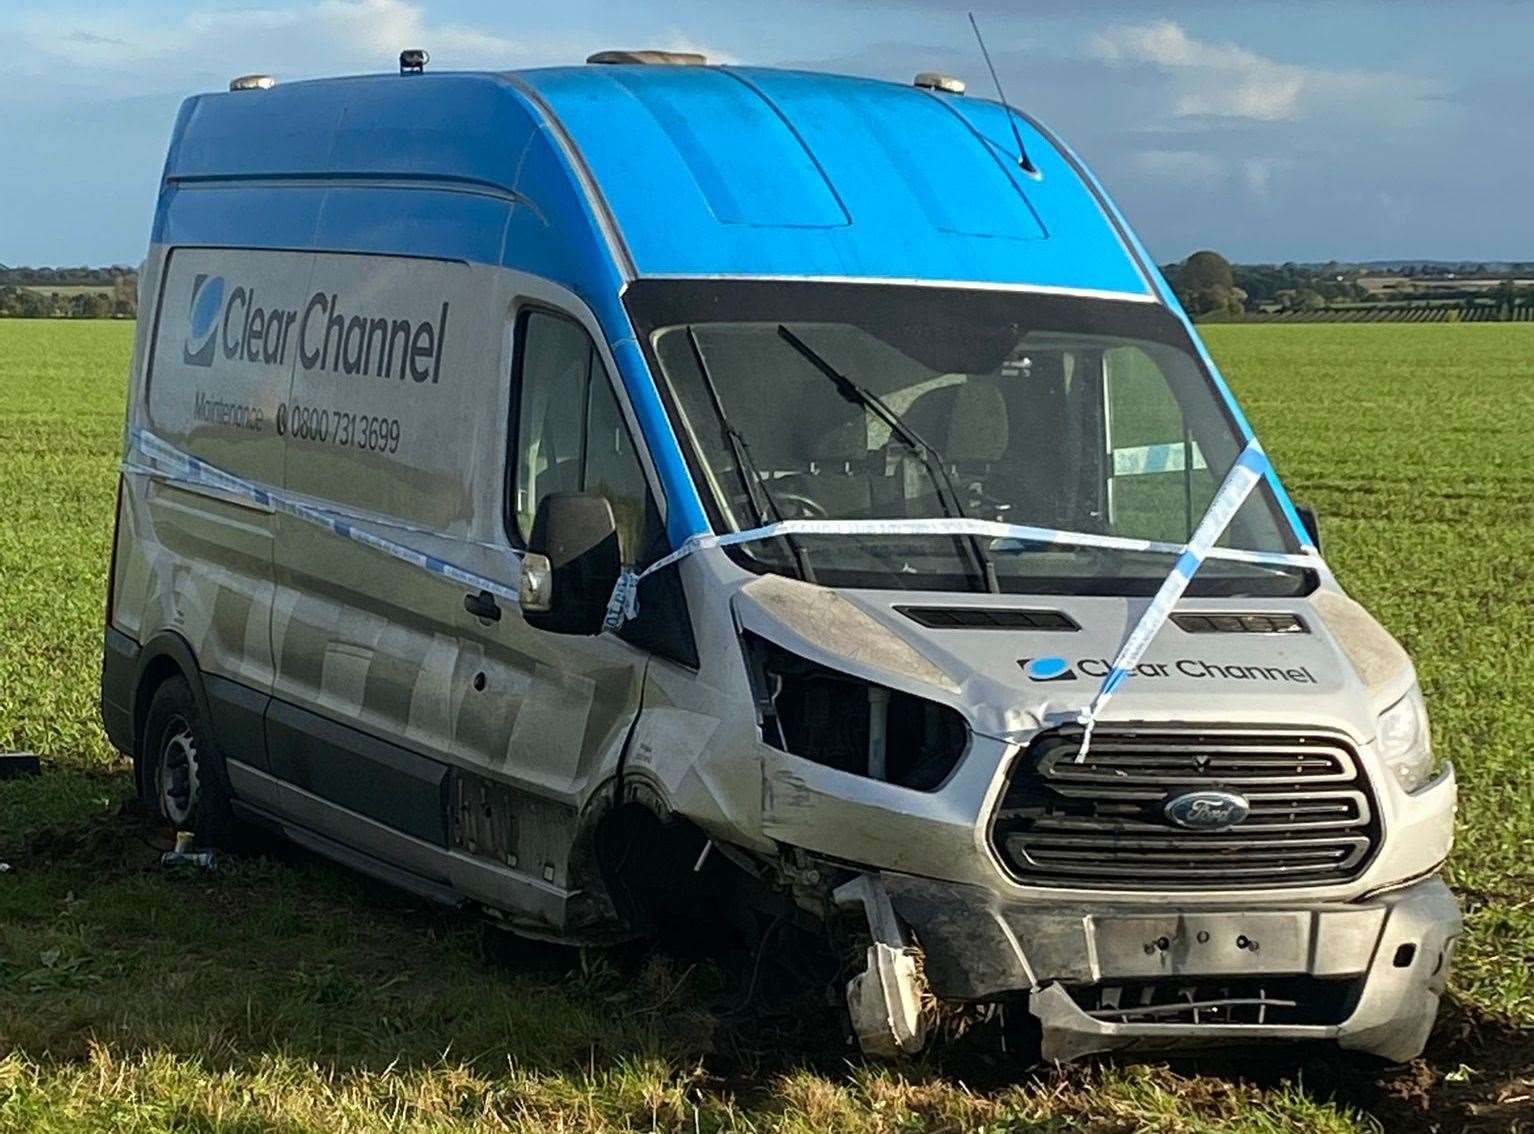 The van ended up in a field